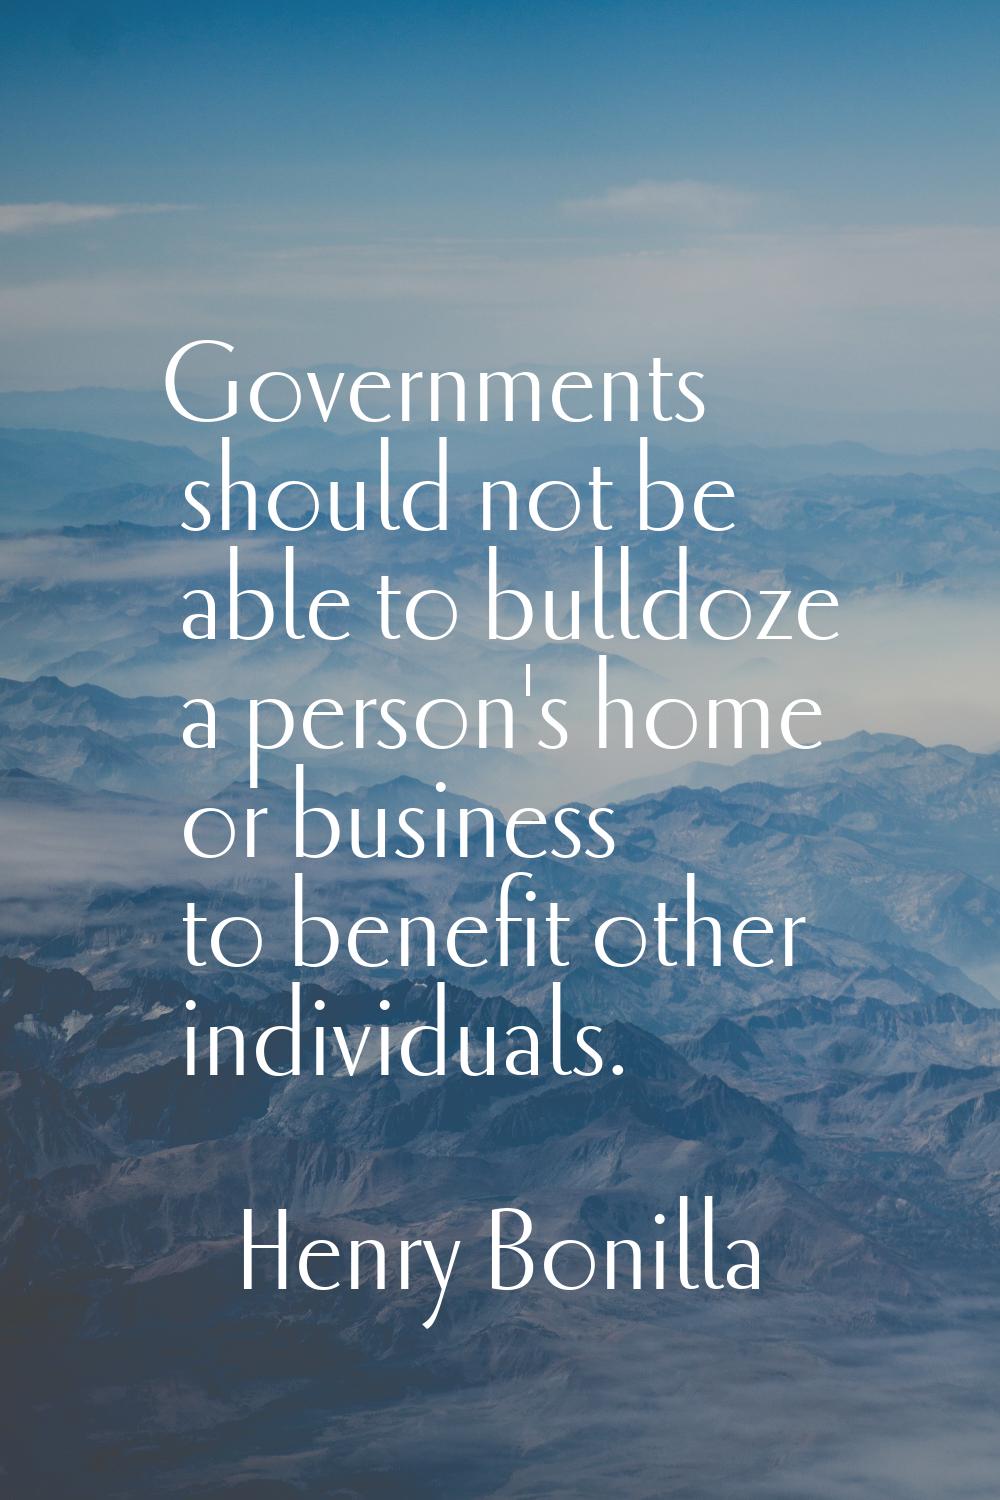 Governments should not be able to bulldoze a person's home or business to benefit other individuals